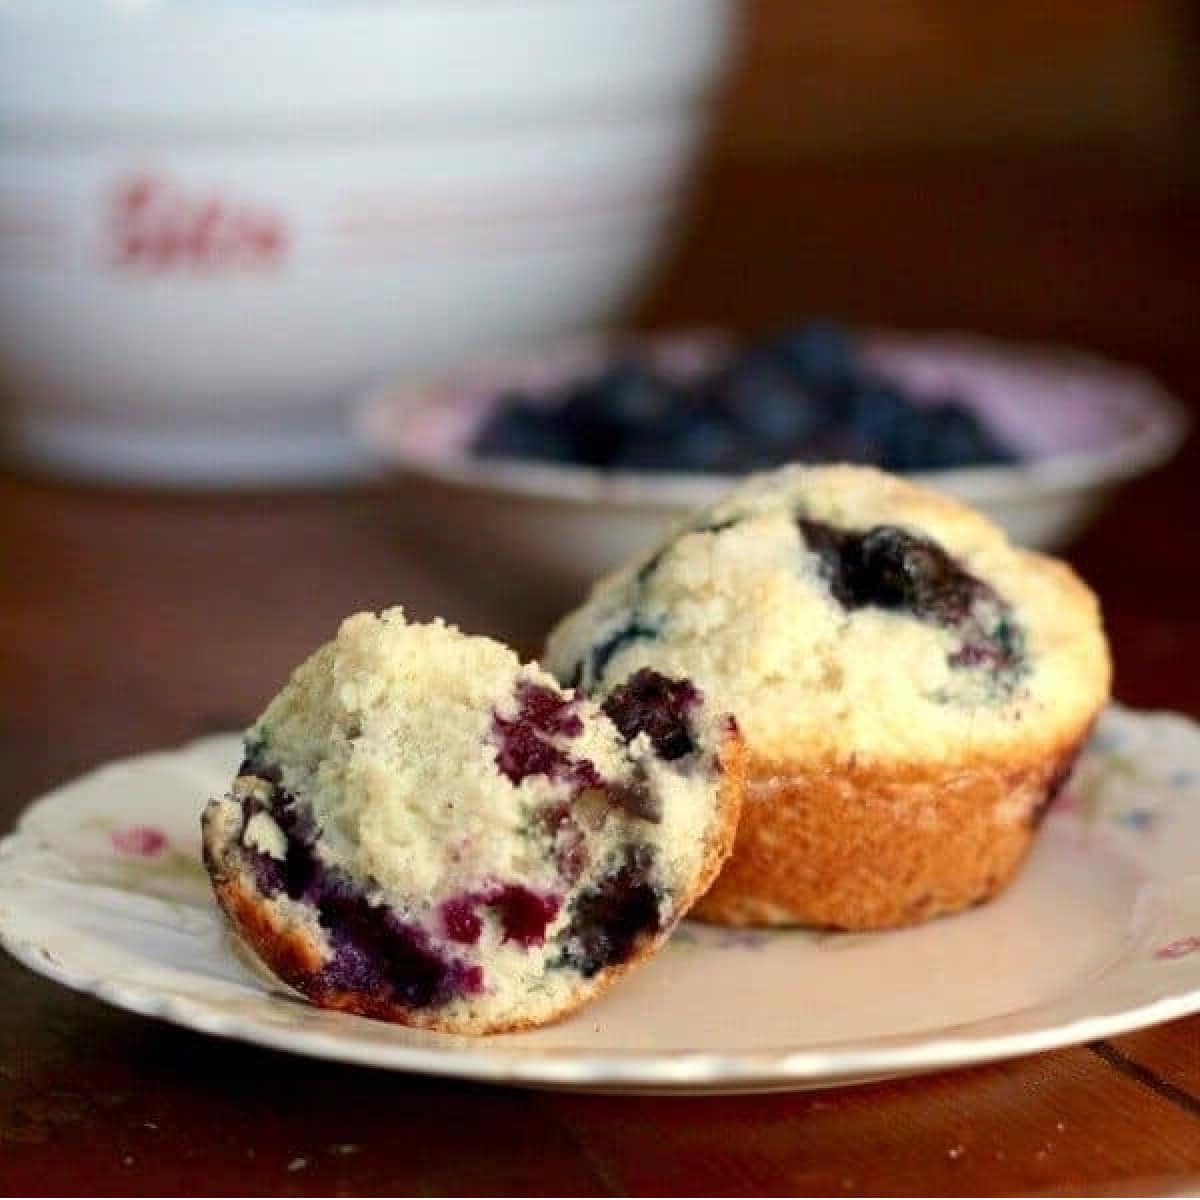 Blueberry muffin broken open on a plate to show the moist, tender interior.